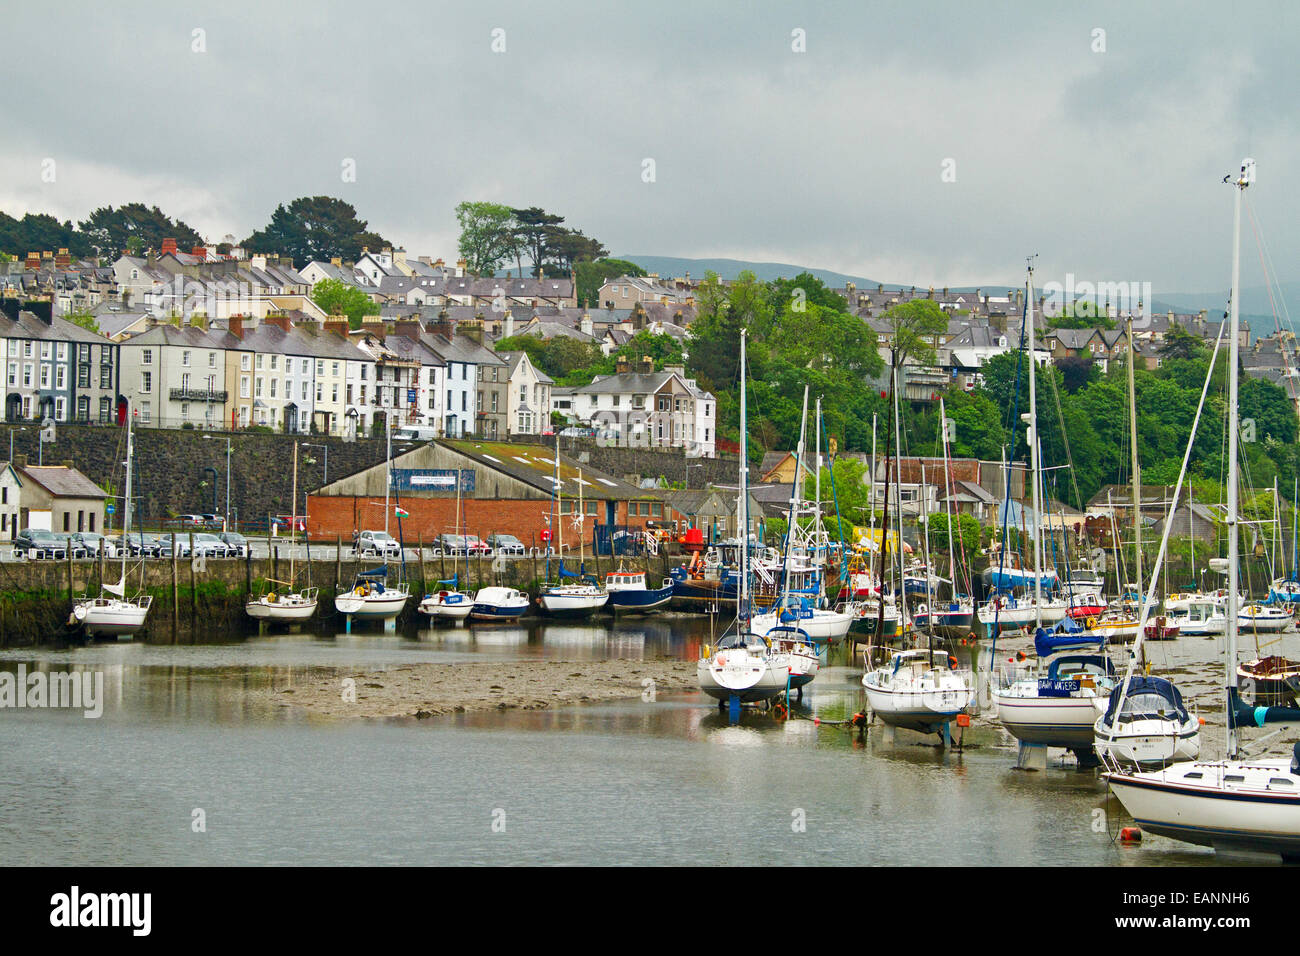 Boats moored at low tide in harbour at Caernarfon, Wales, with houses and trees on nearby hillside Stock Photo